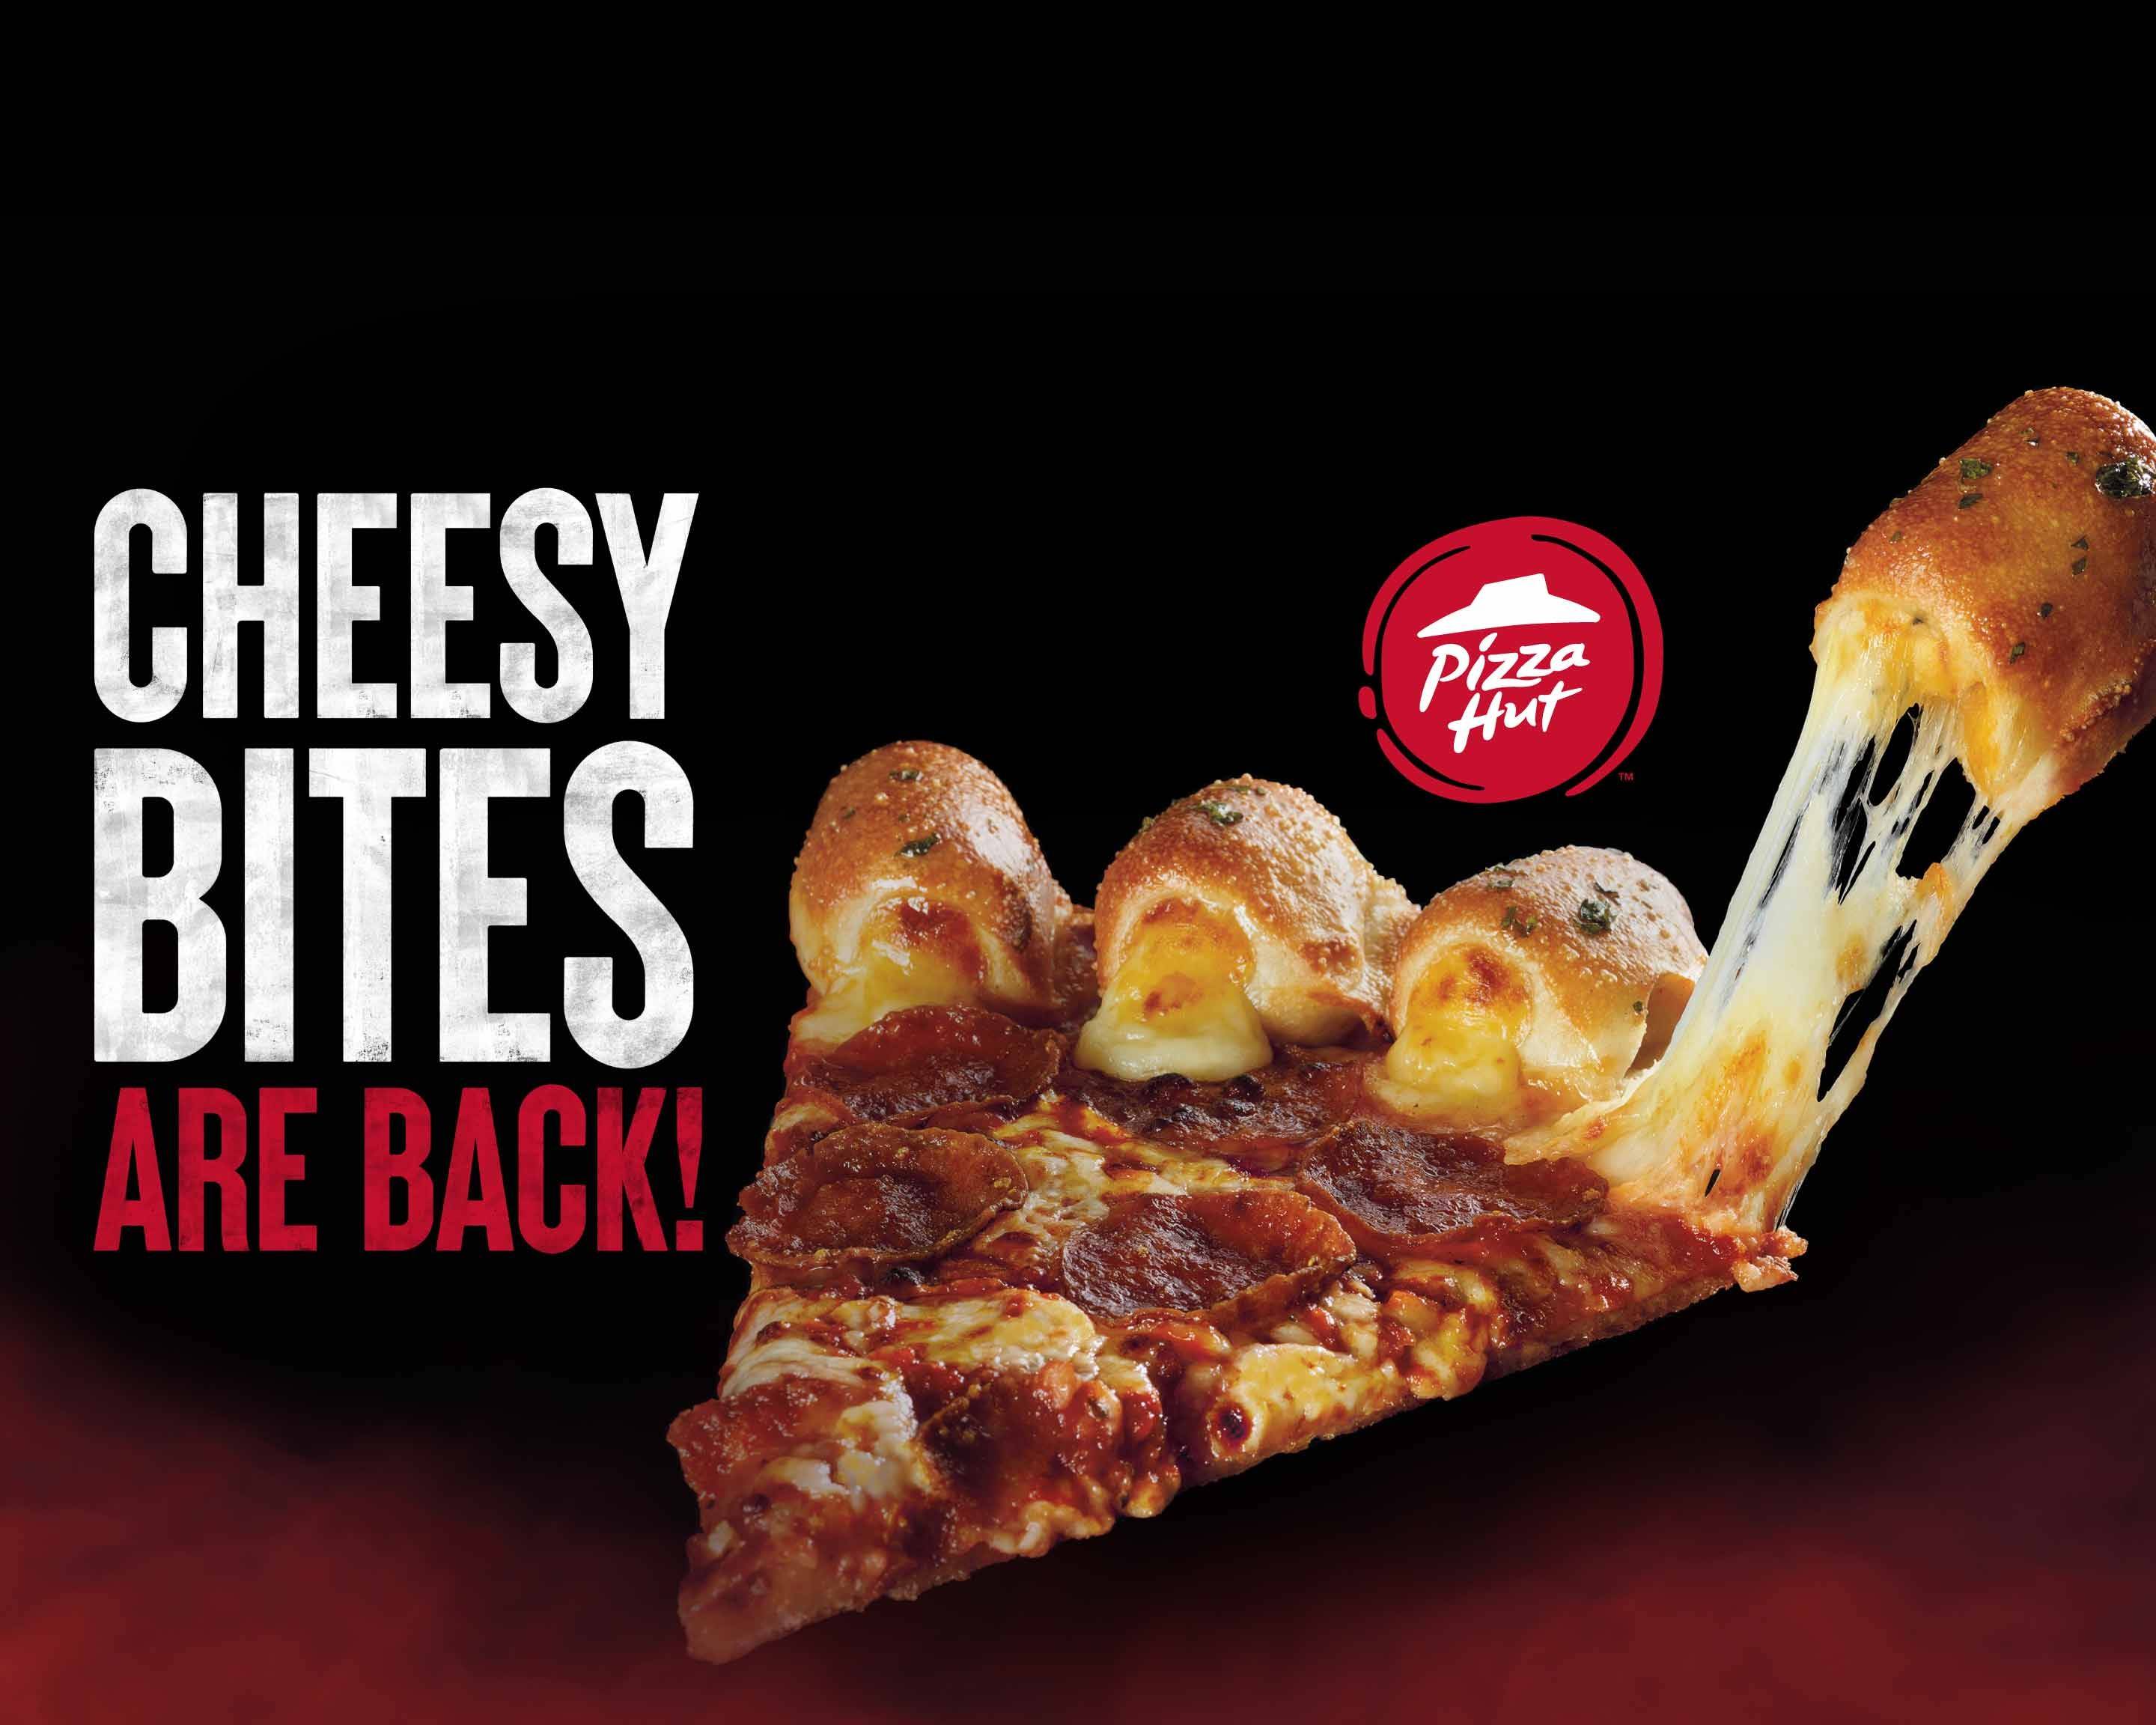 Pizza Hut Deals: New Double It Box Gets Two Pizzas for $12.99